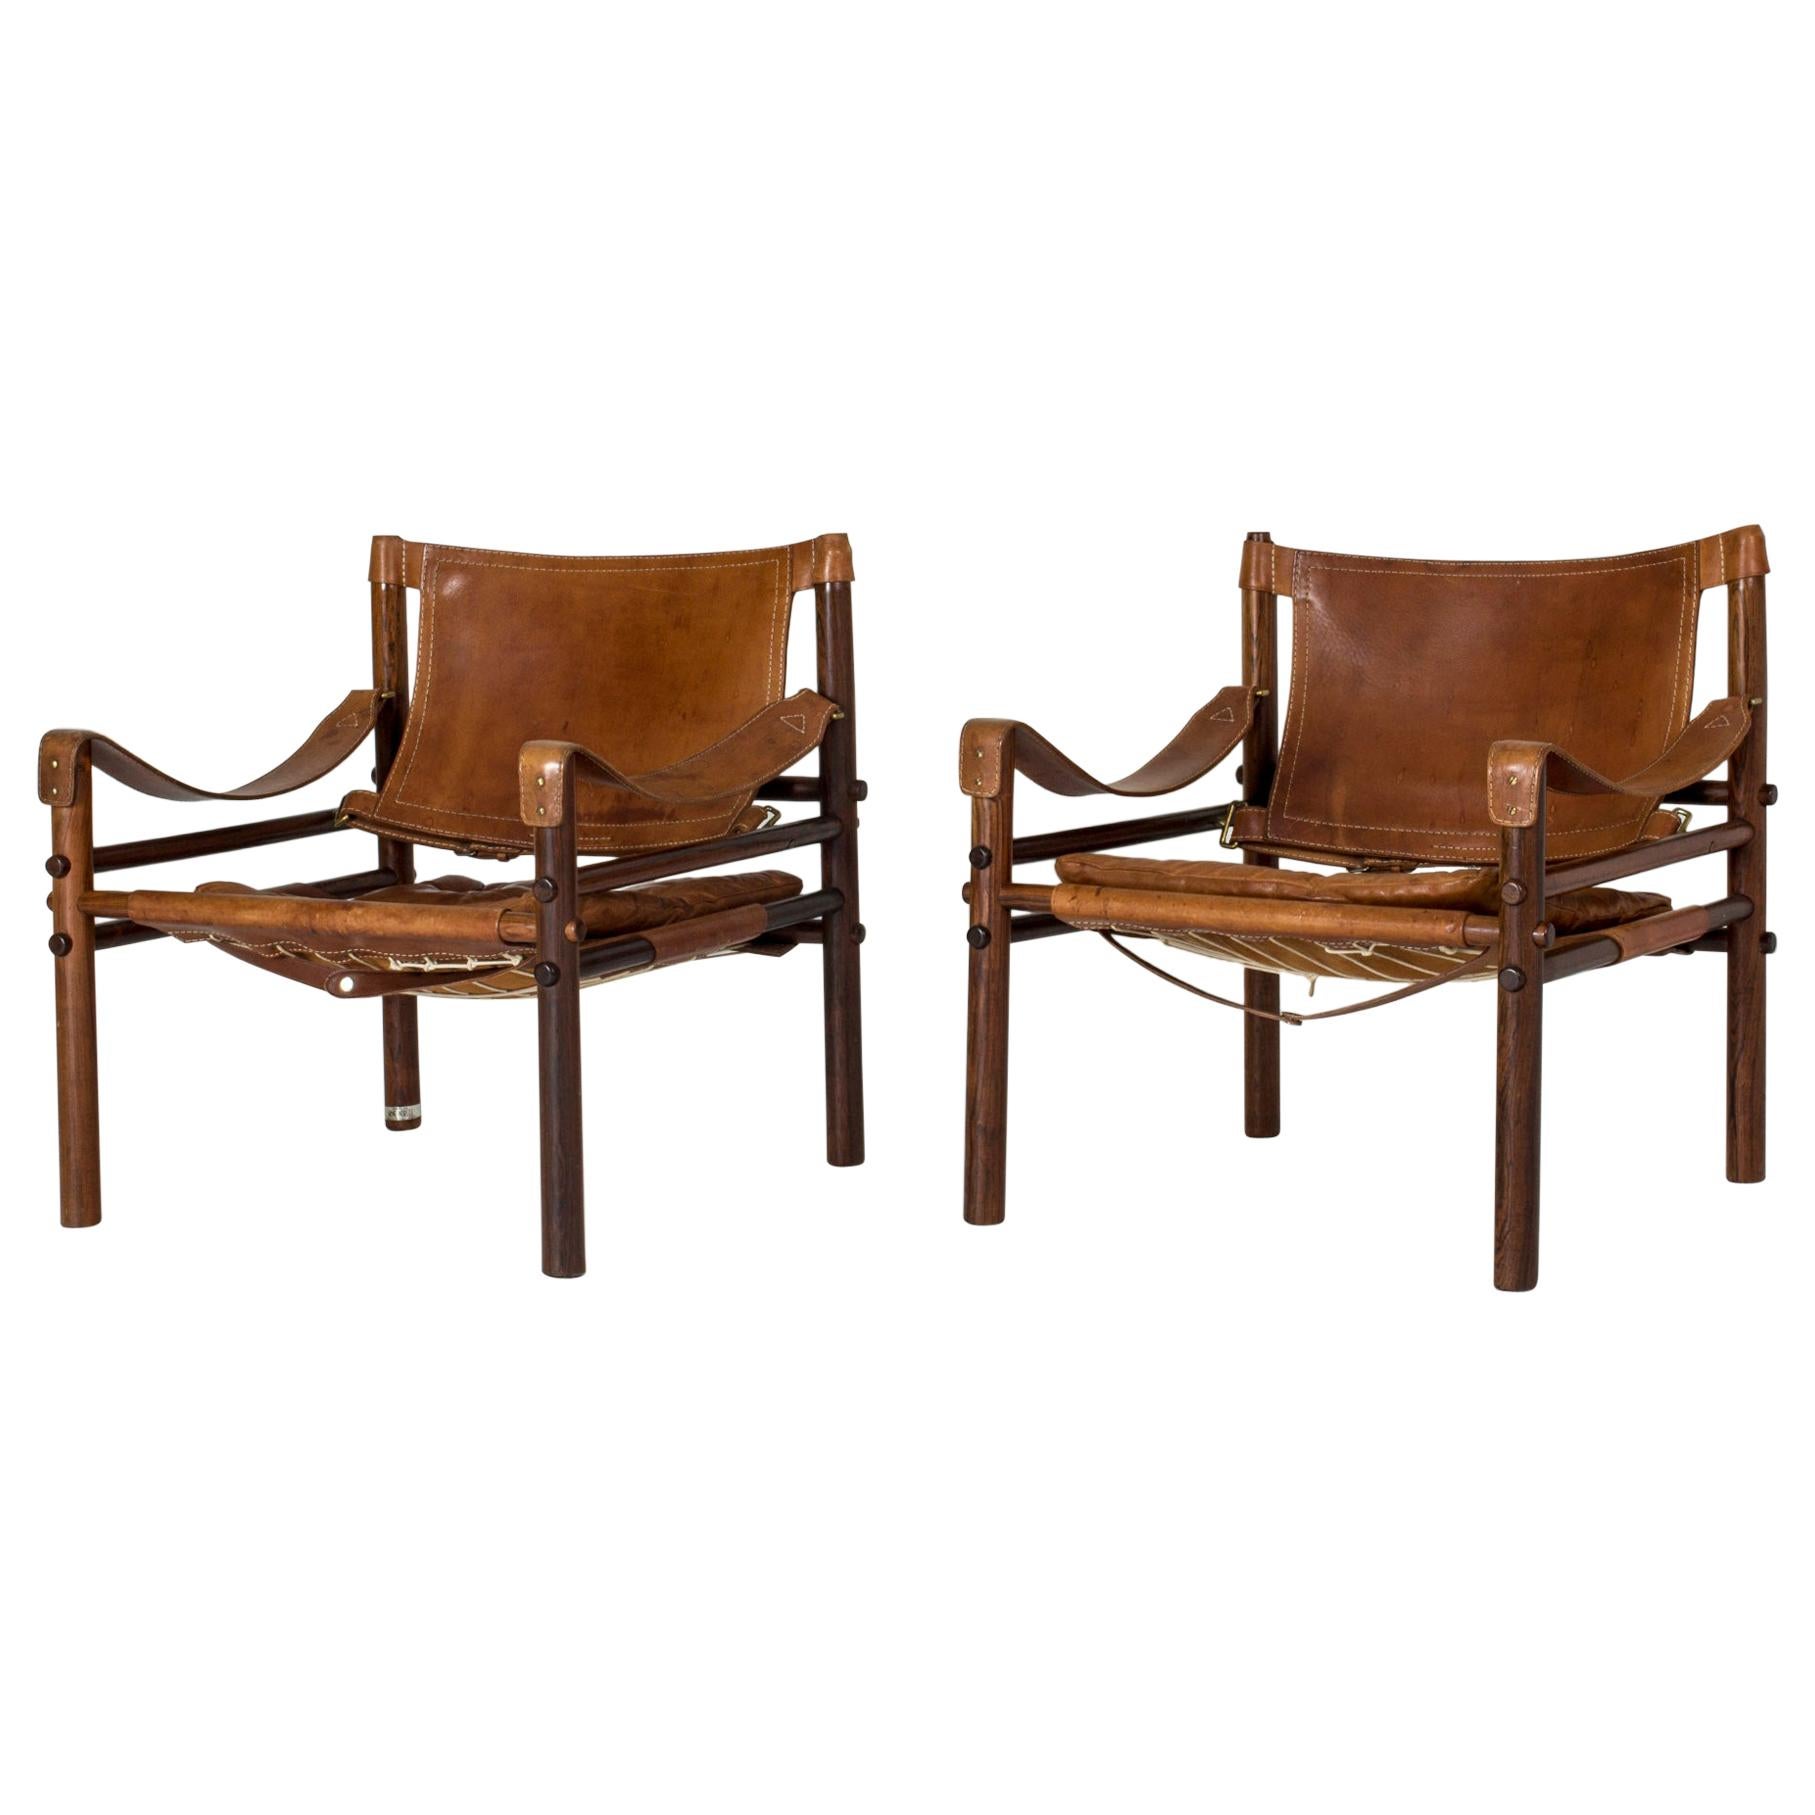 Pair of Midcentury "Sirocco" Lounge Chairs by Arne Norell